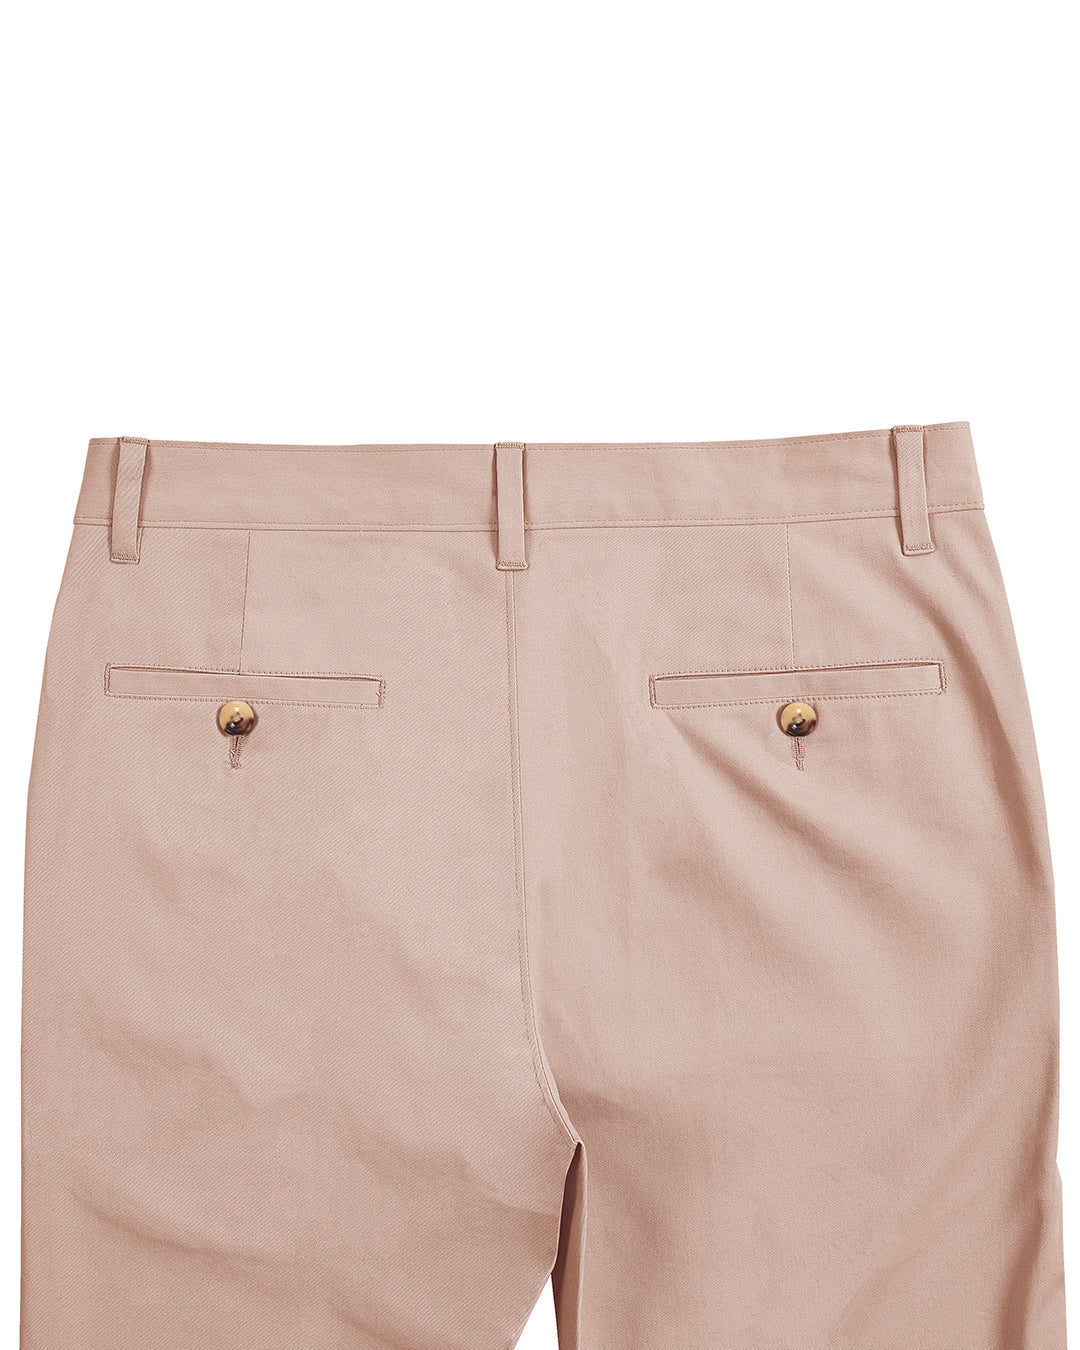 Back view of custom Genoa Chino pants for men by Luxire in pale pink